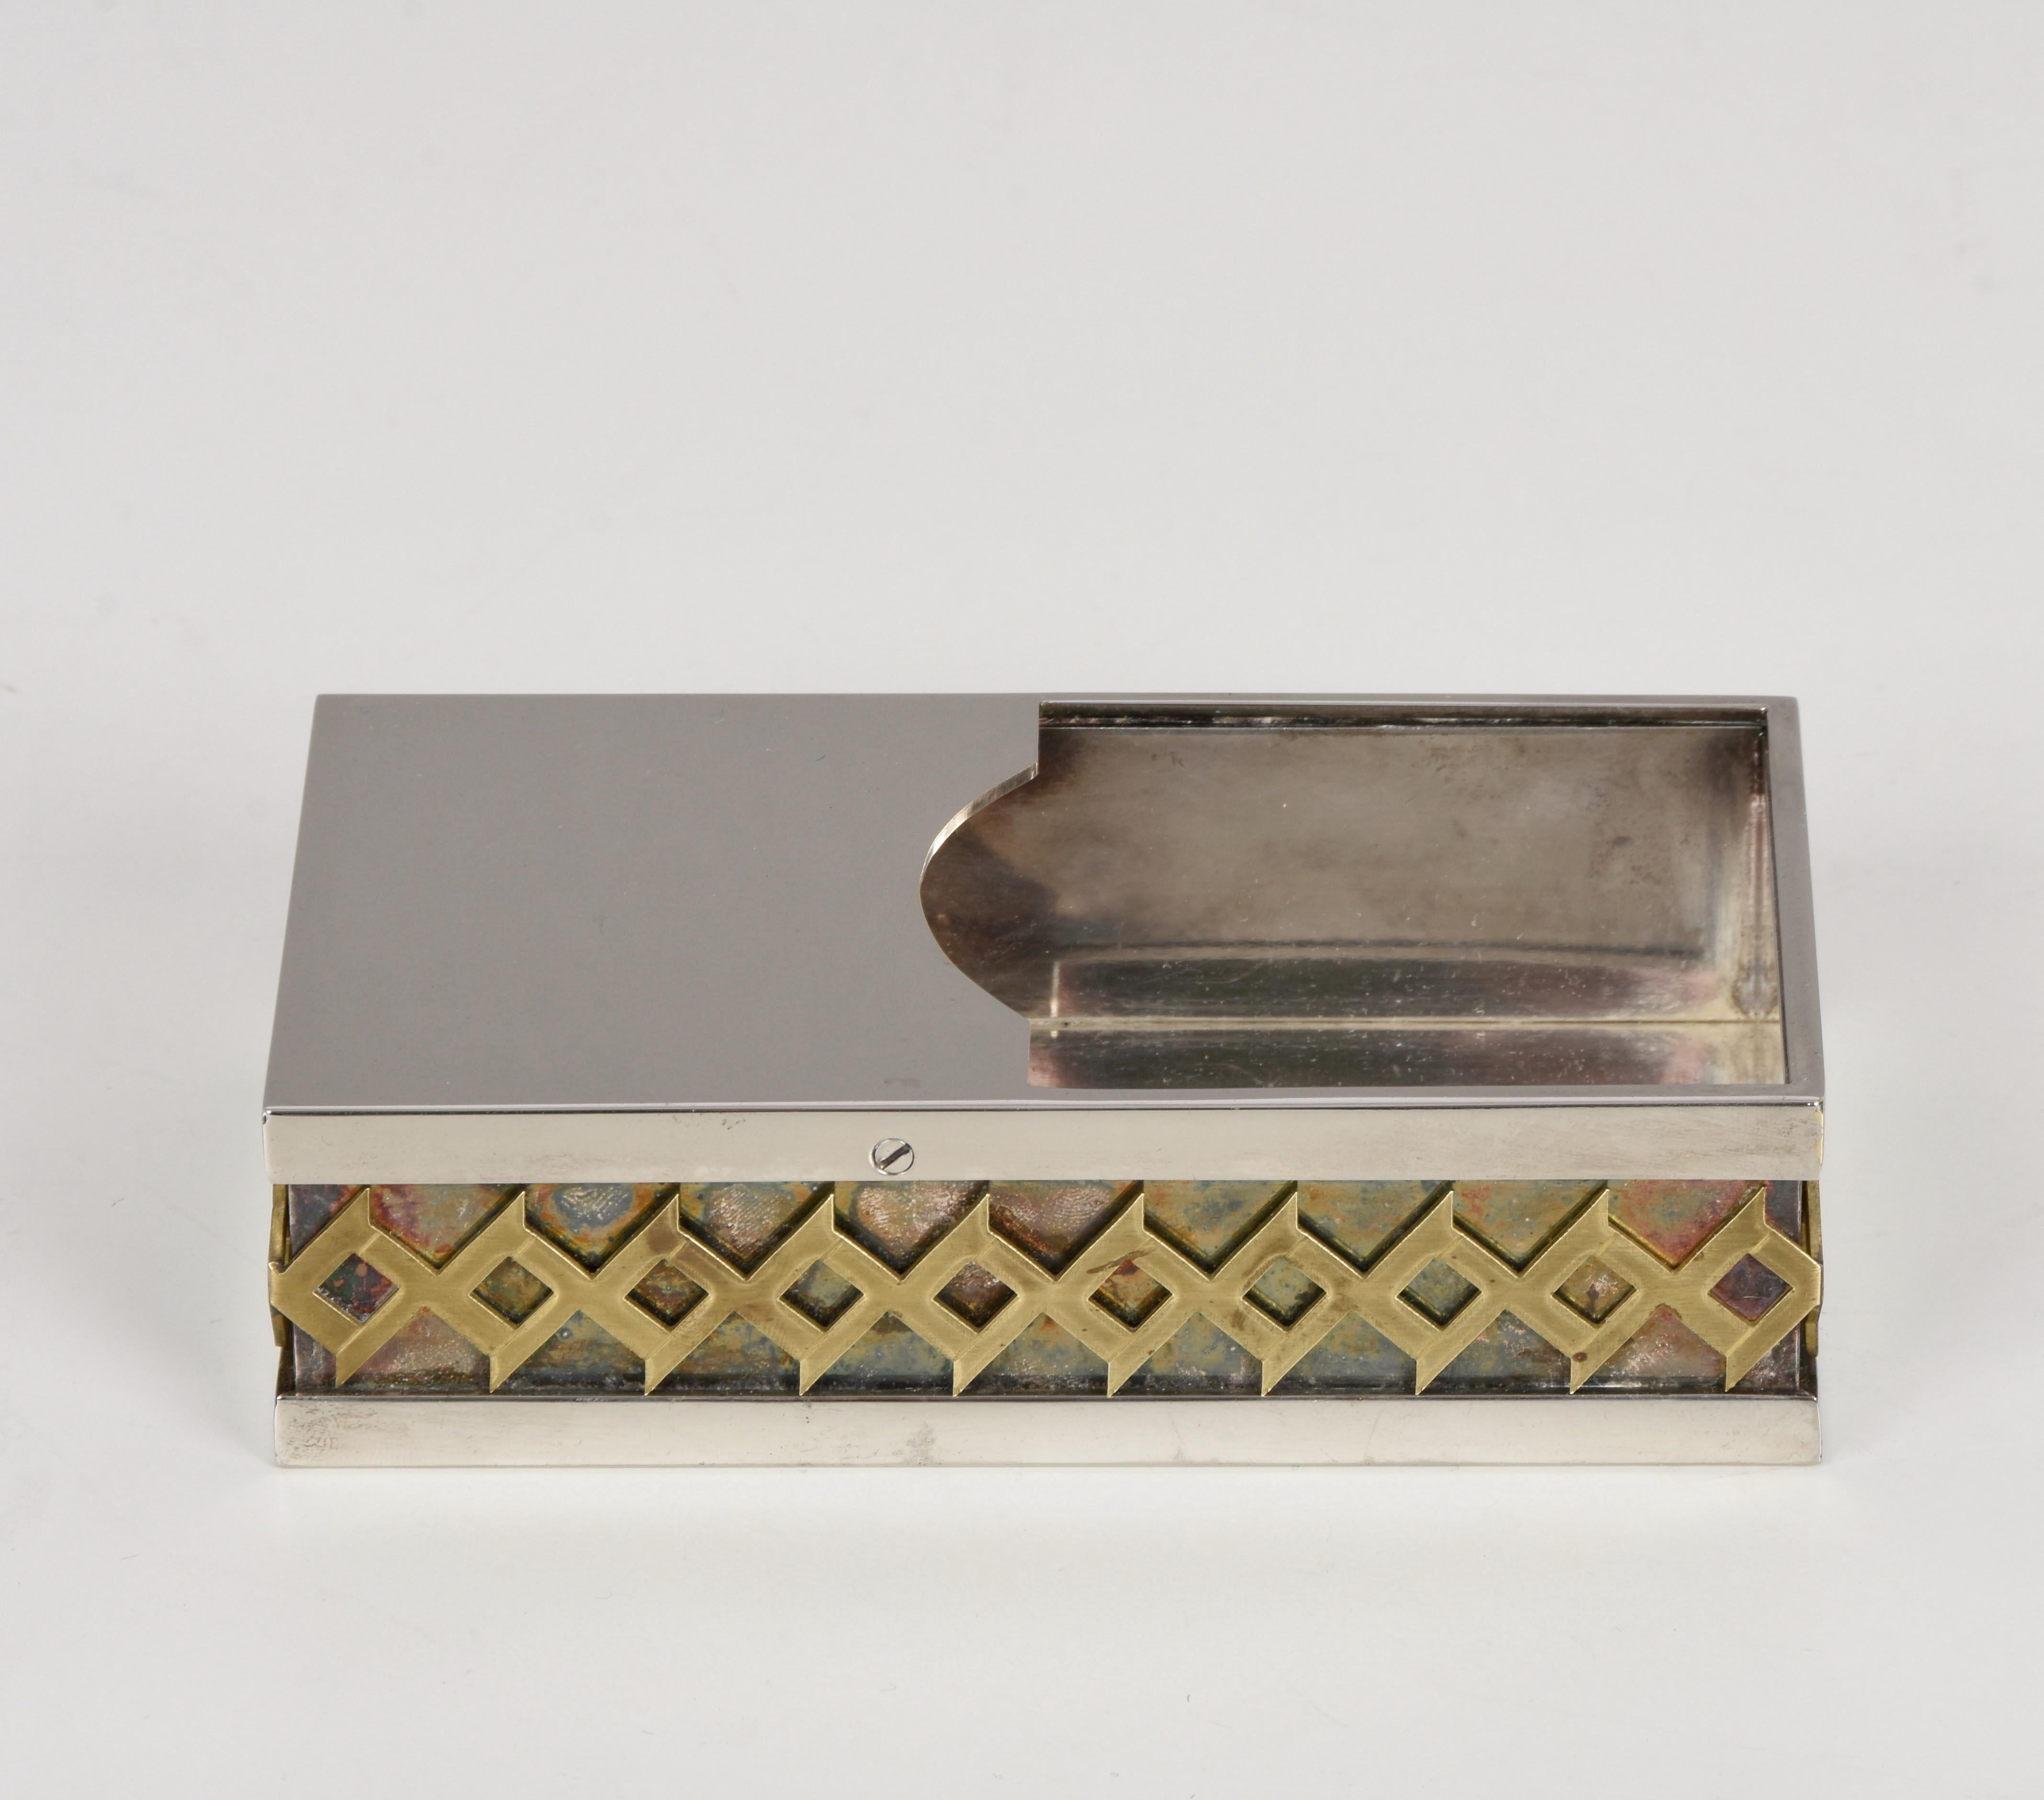 Elegant box midcentury silver plate decorative box. This wonderful piece was designed in Italy during the 1970s by Benaglia for Cleto Munari.

The master combination of silver plate and gilded brass, mixed with straight and pure lines.

A